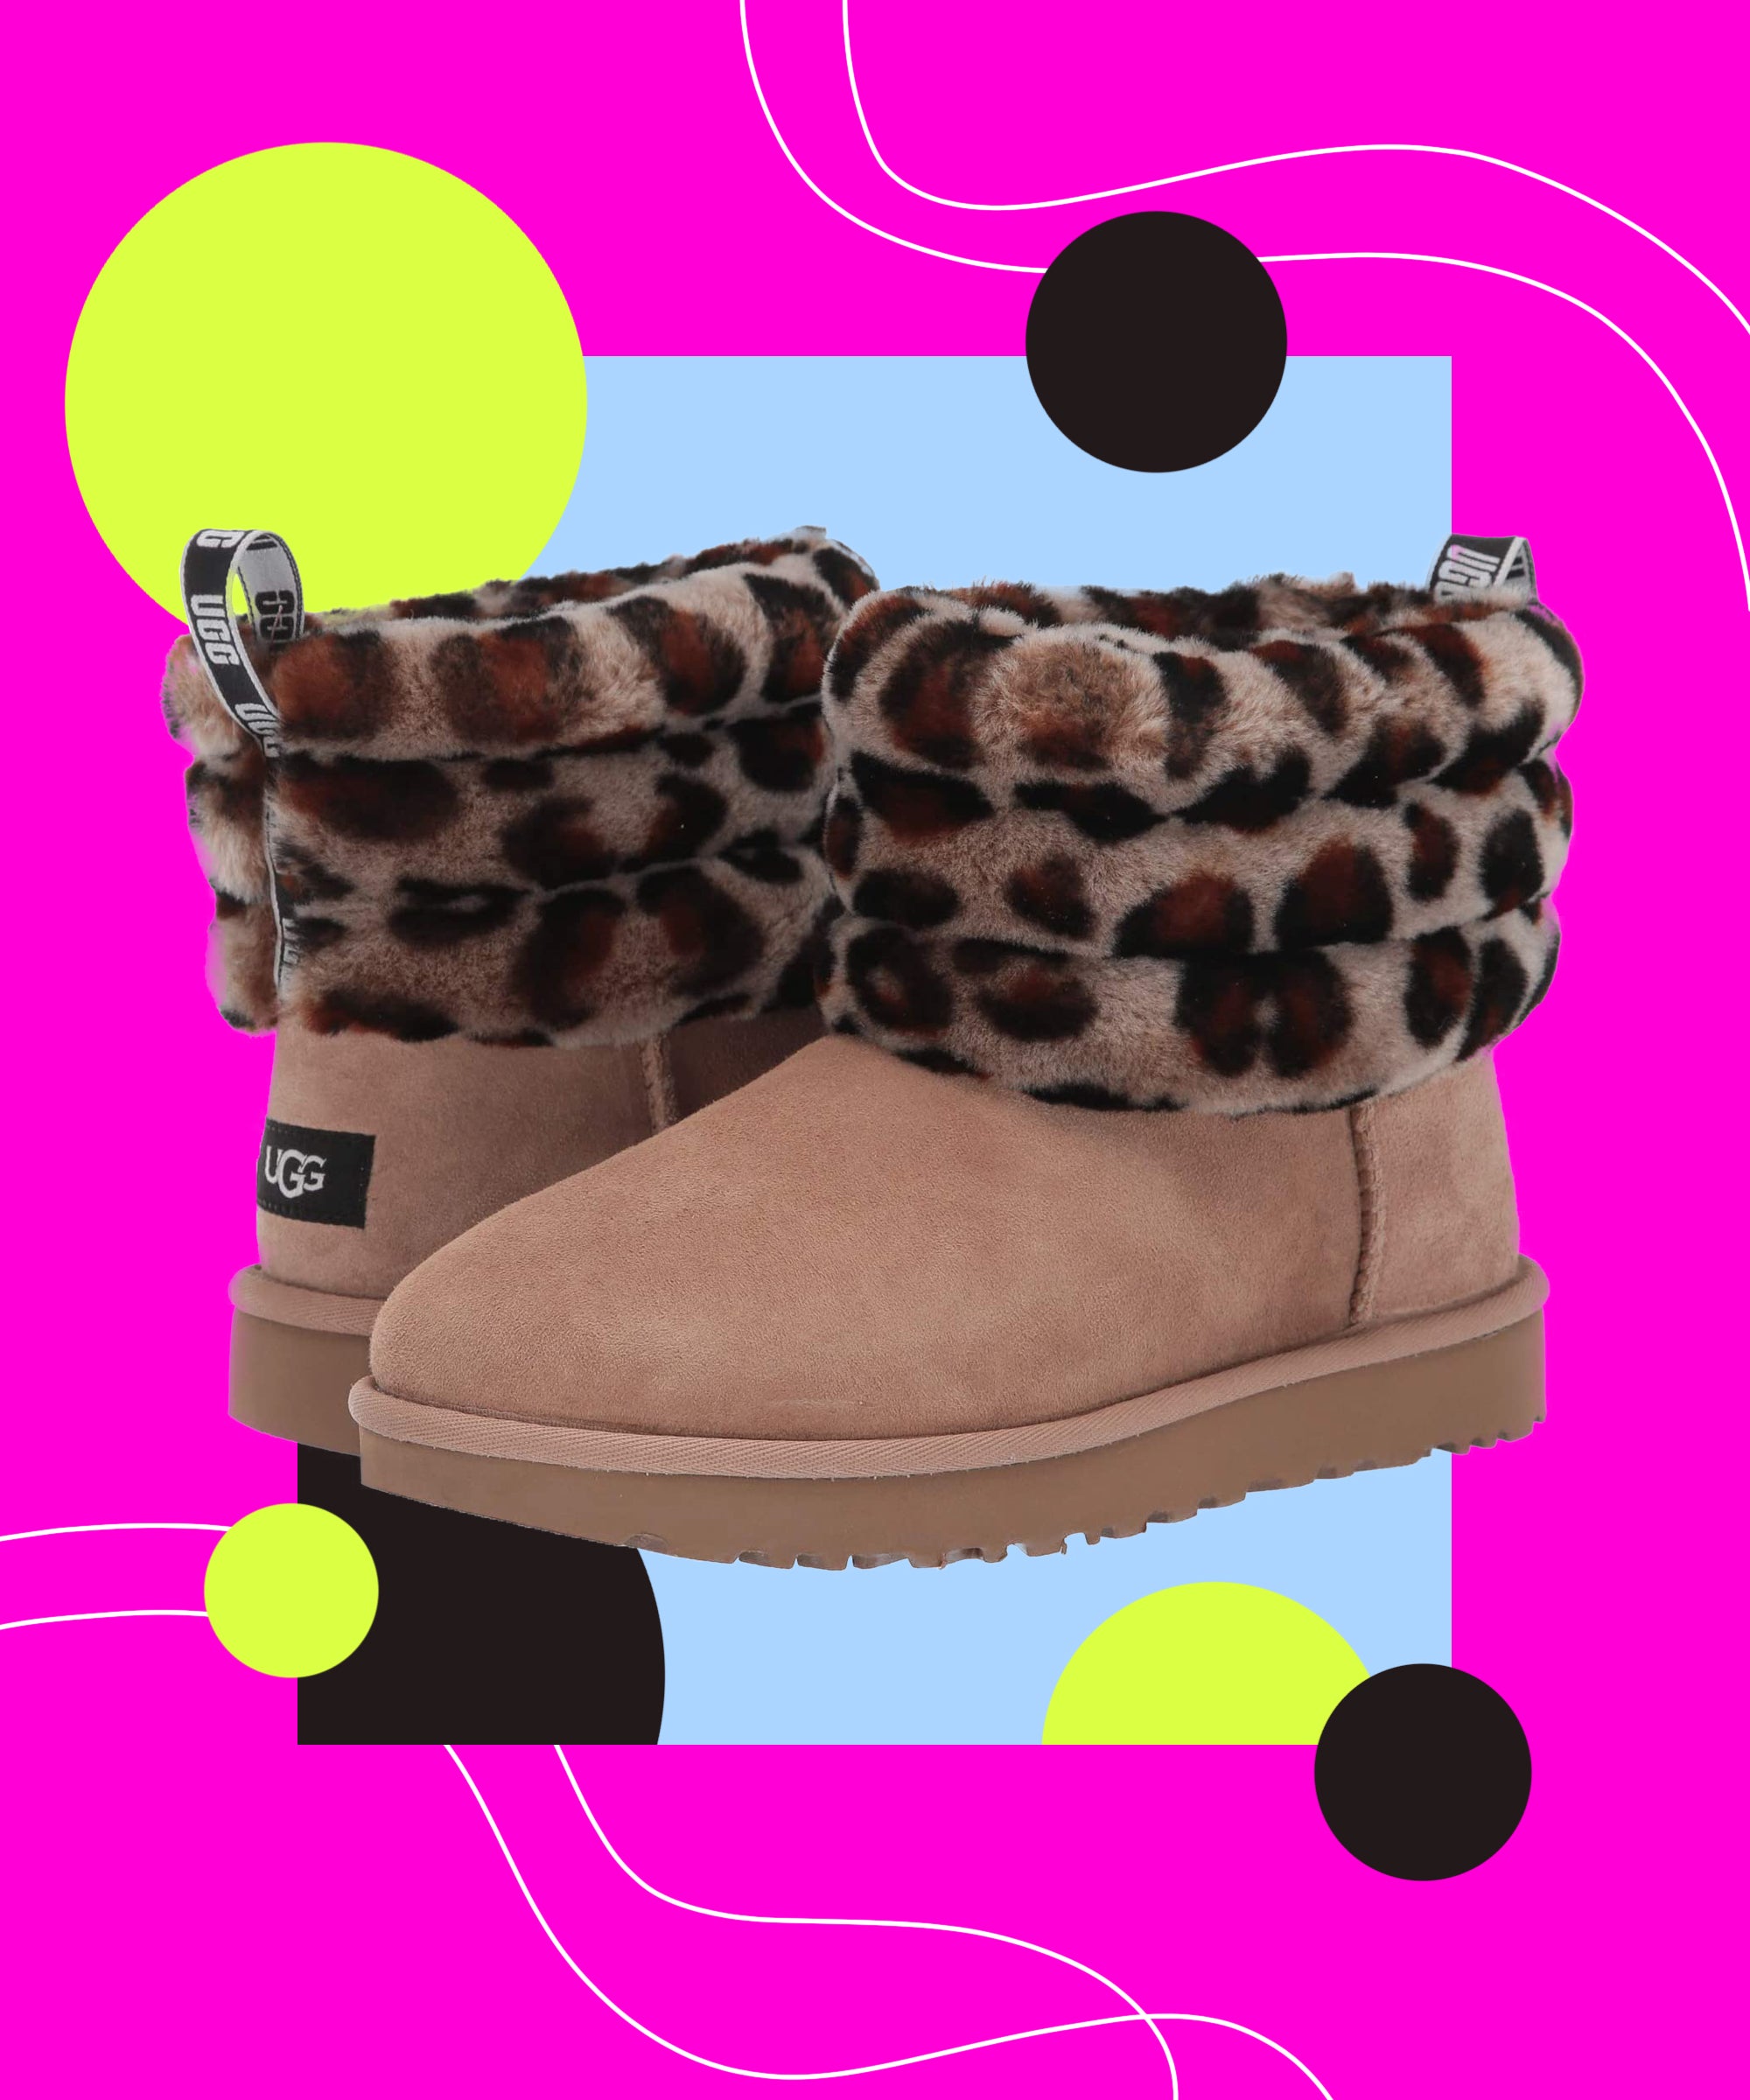 cyber monday deals on uggs